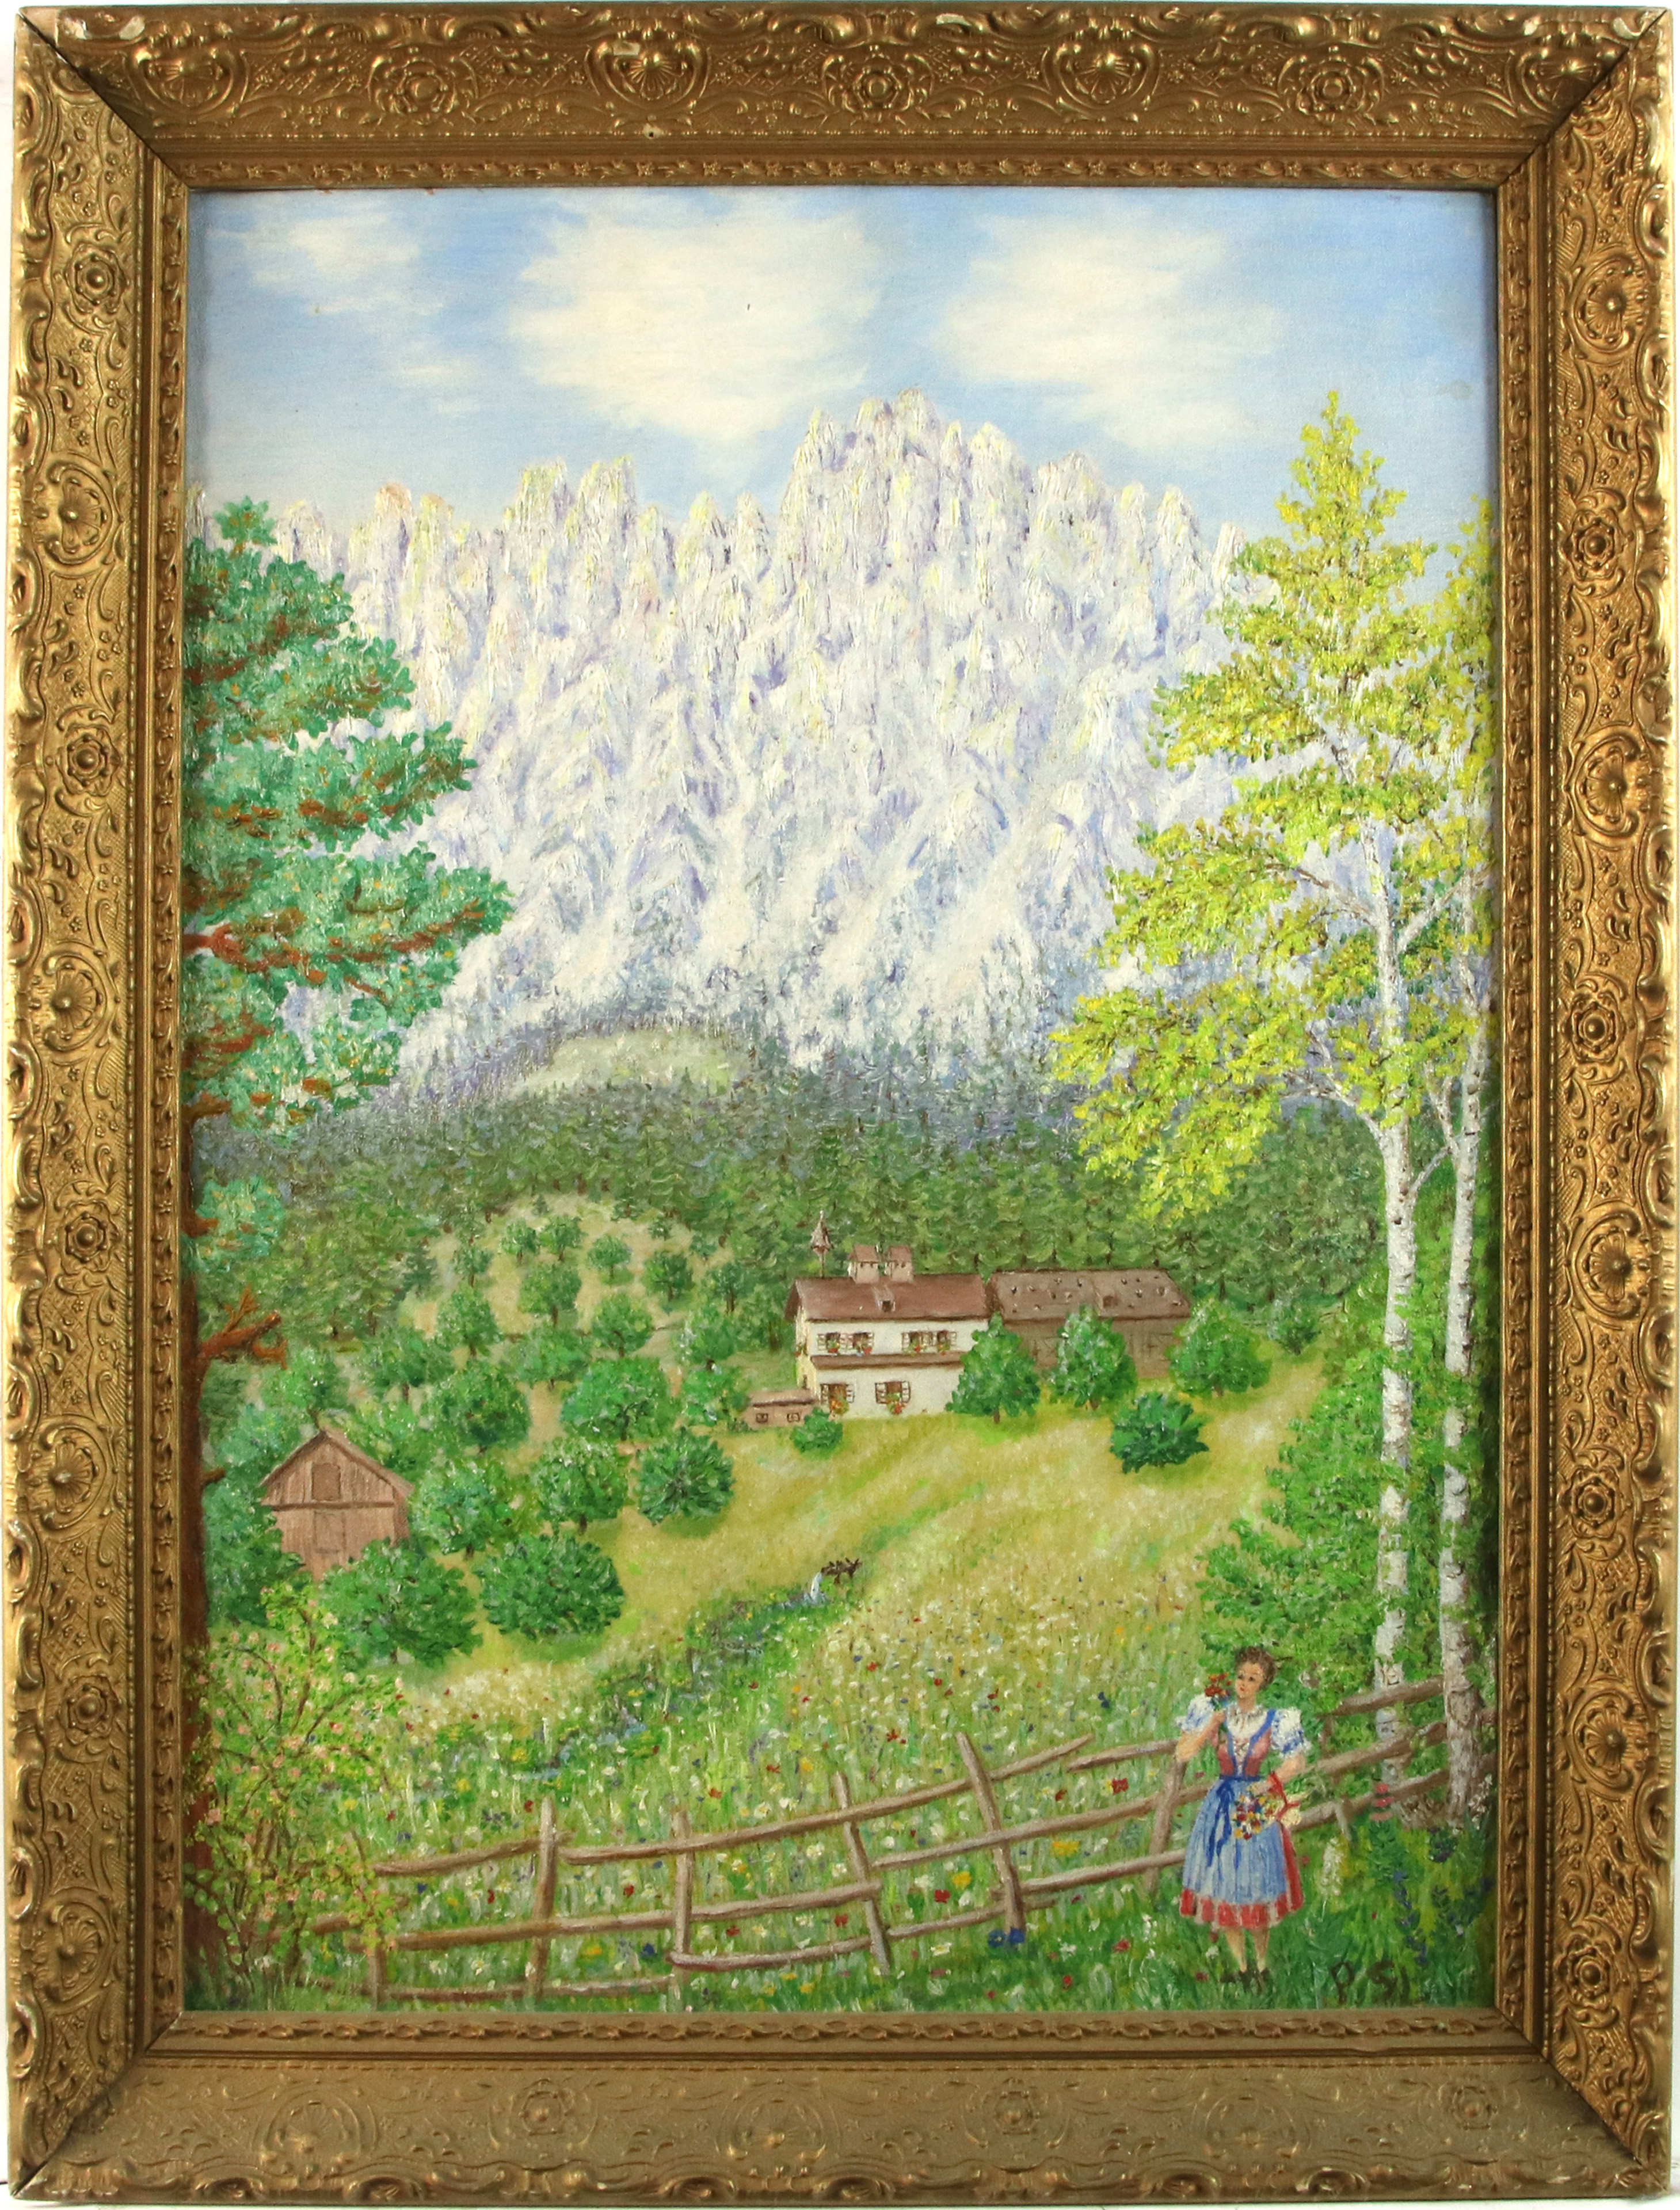 PAINTING, IN THE ALPS In the Alps,